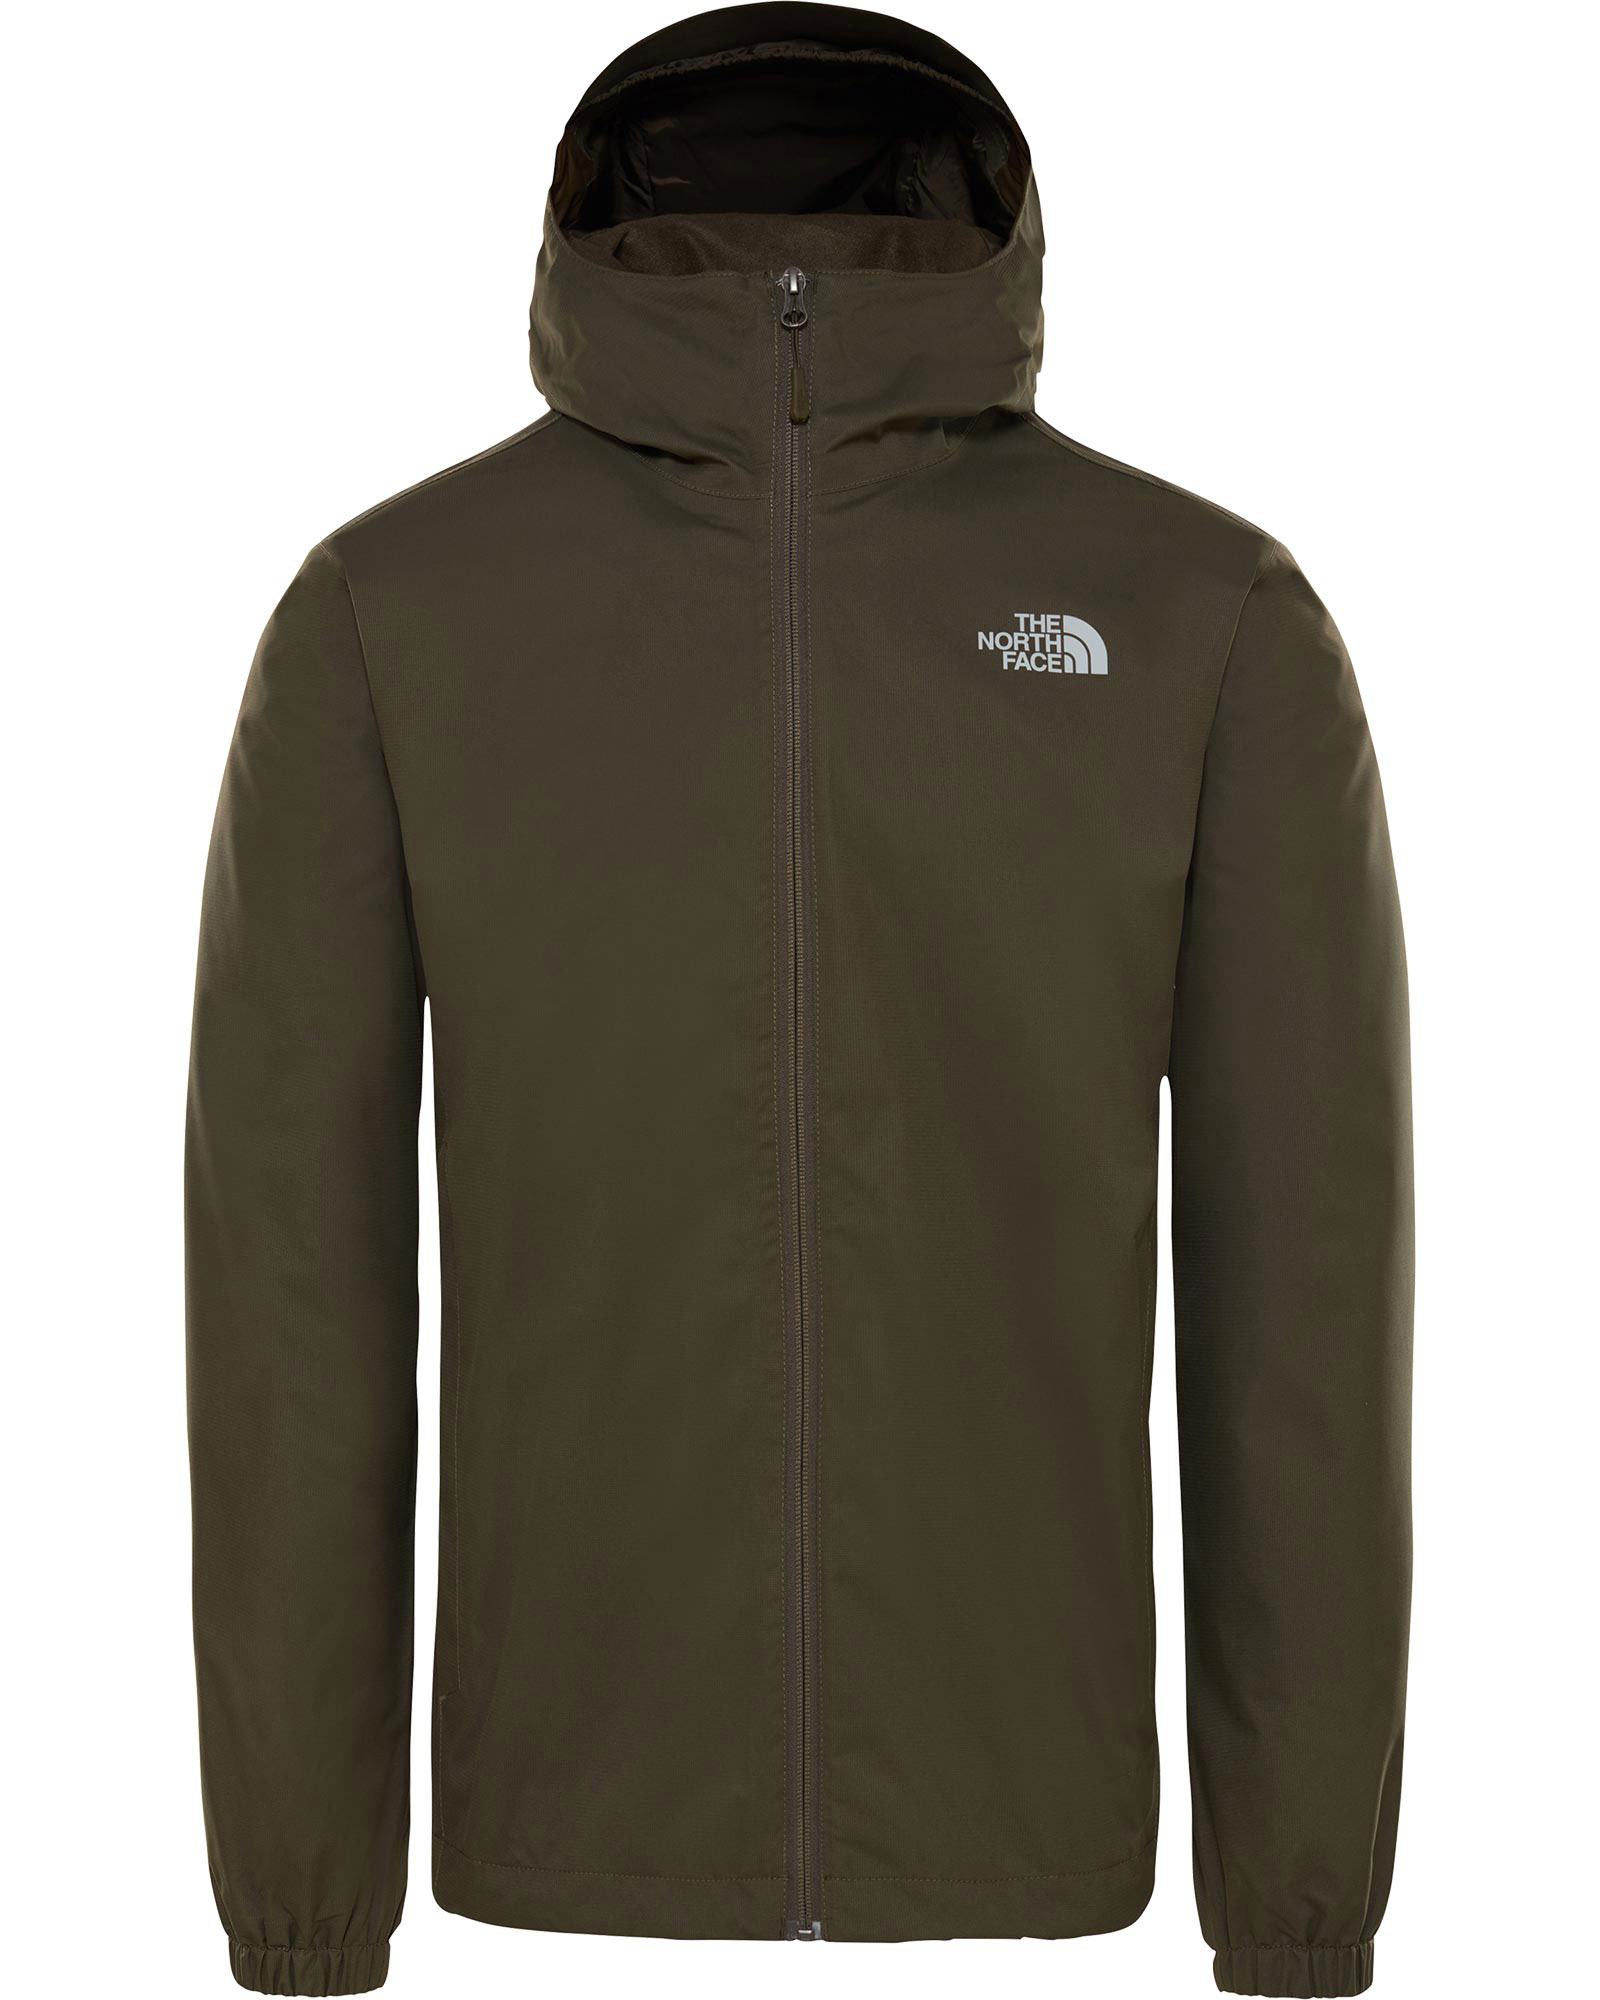 The North Face Quest DryVent Men’s Jacket - New Taupe Green Heather XS